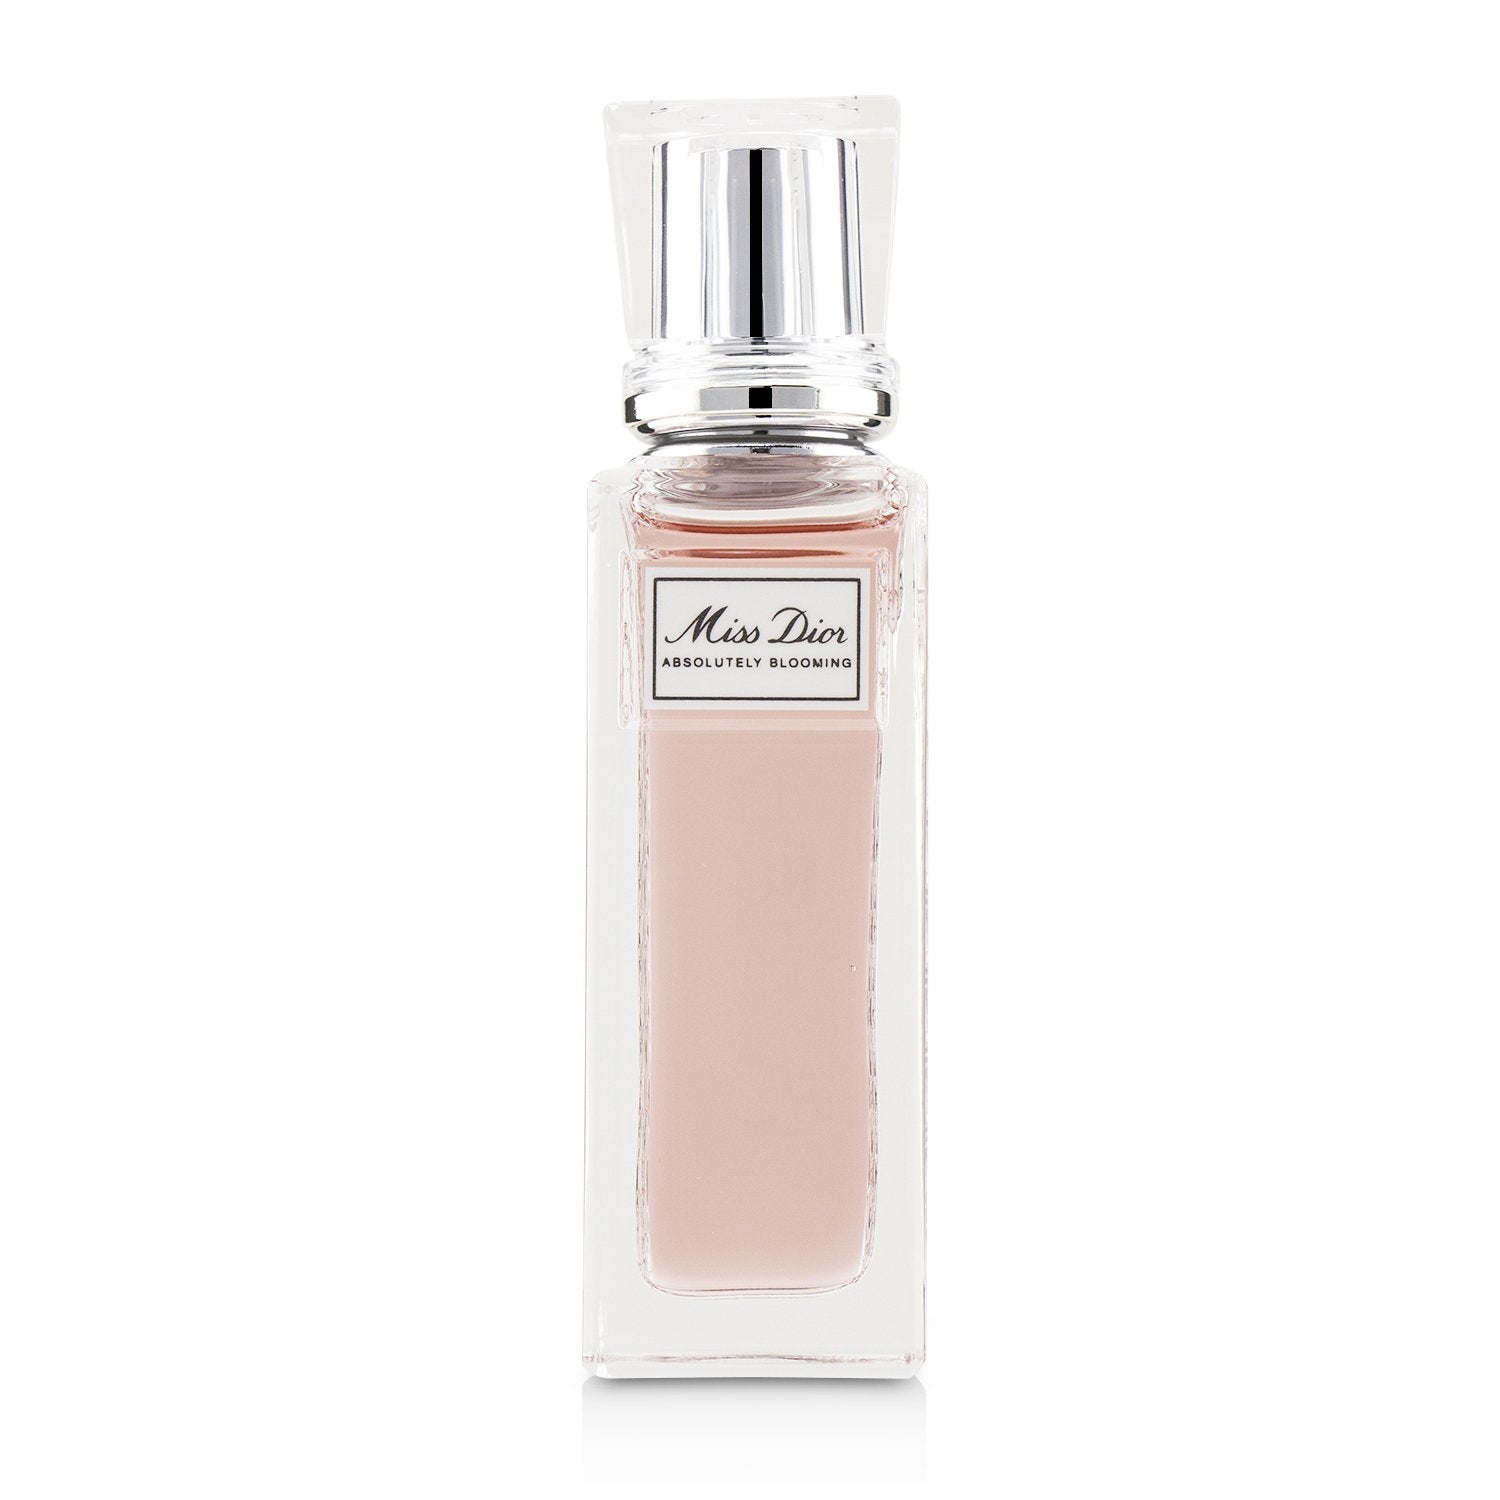 MISS DIOR ABSOLUTELY BLOOMING 50ML 1.7 FL OZ EDP SPRAY